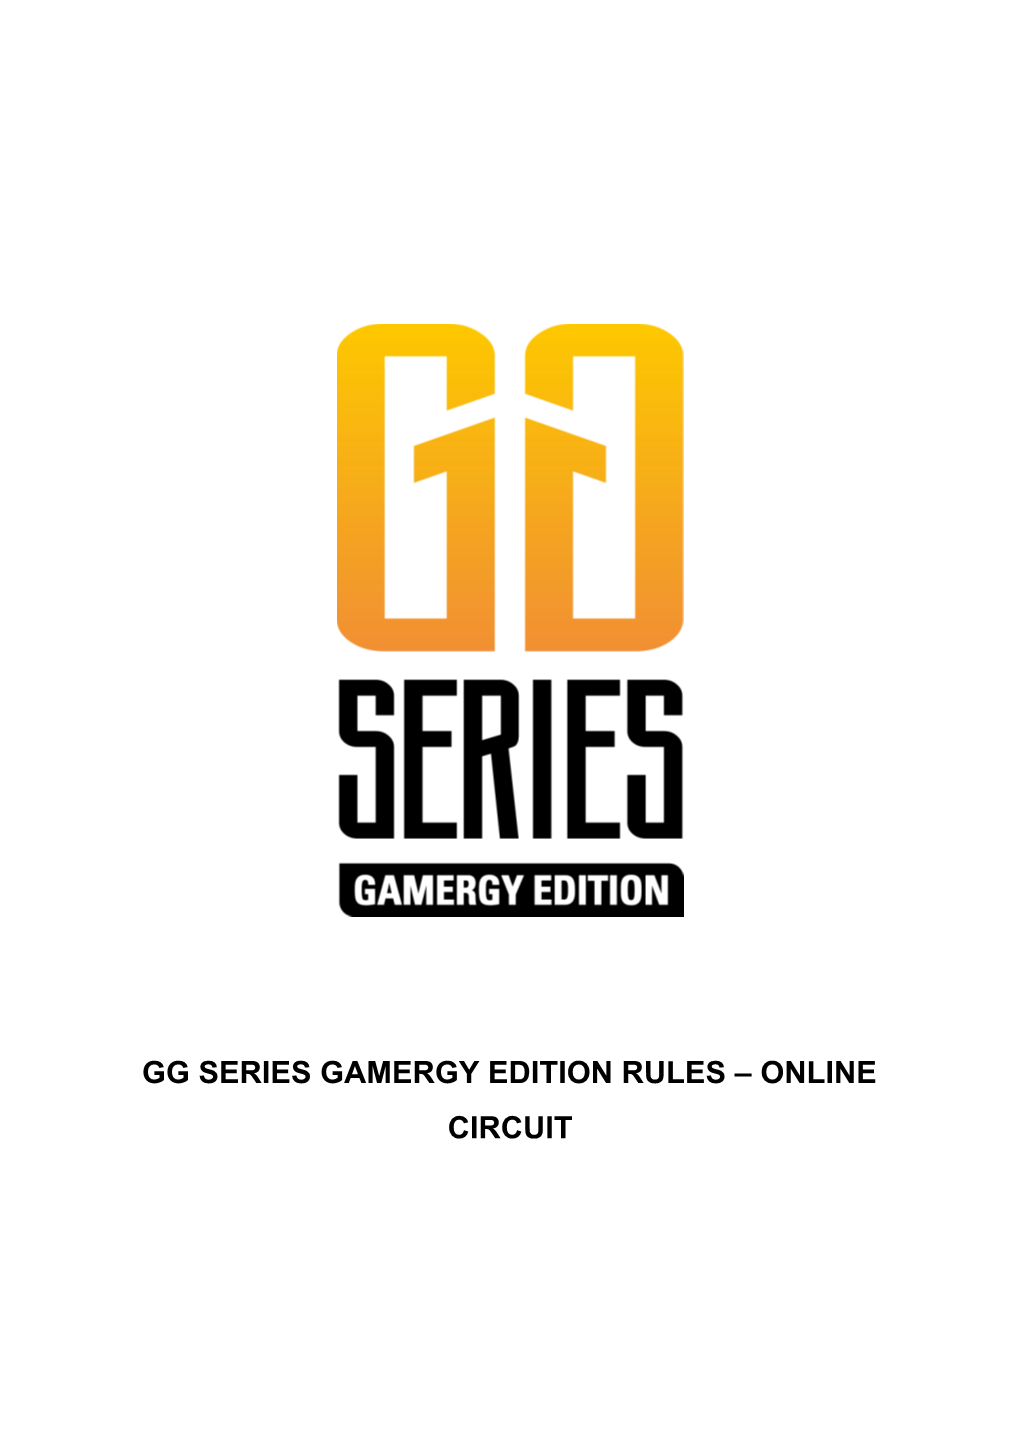 Gg Series Gamergy Edition Rules – Online Circuit